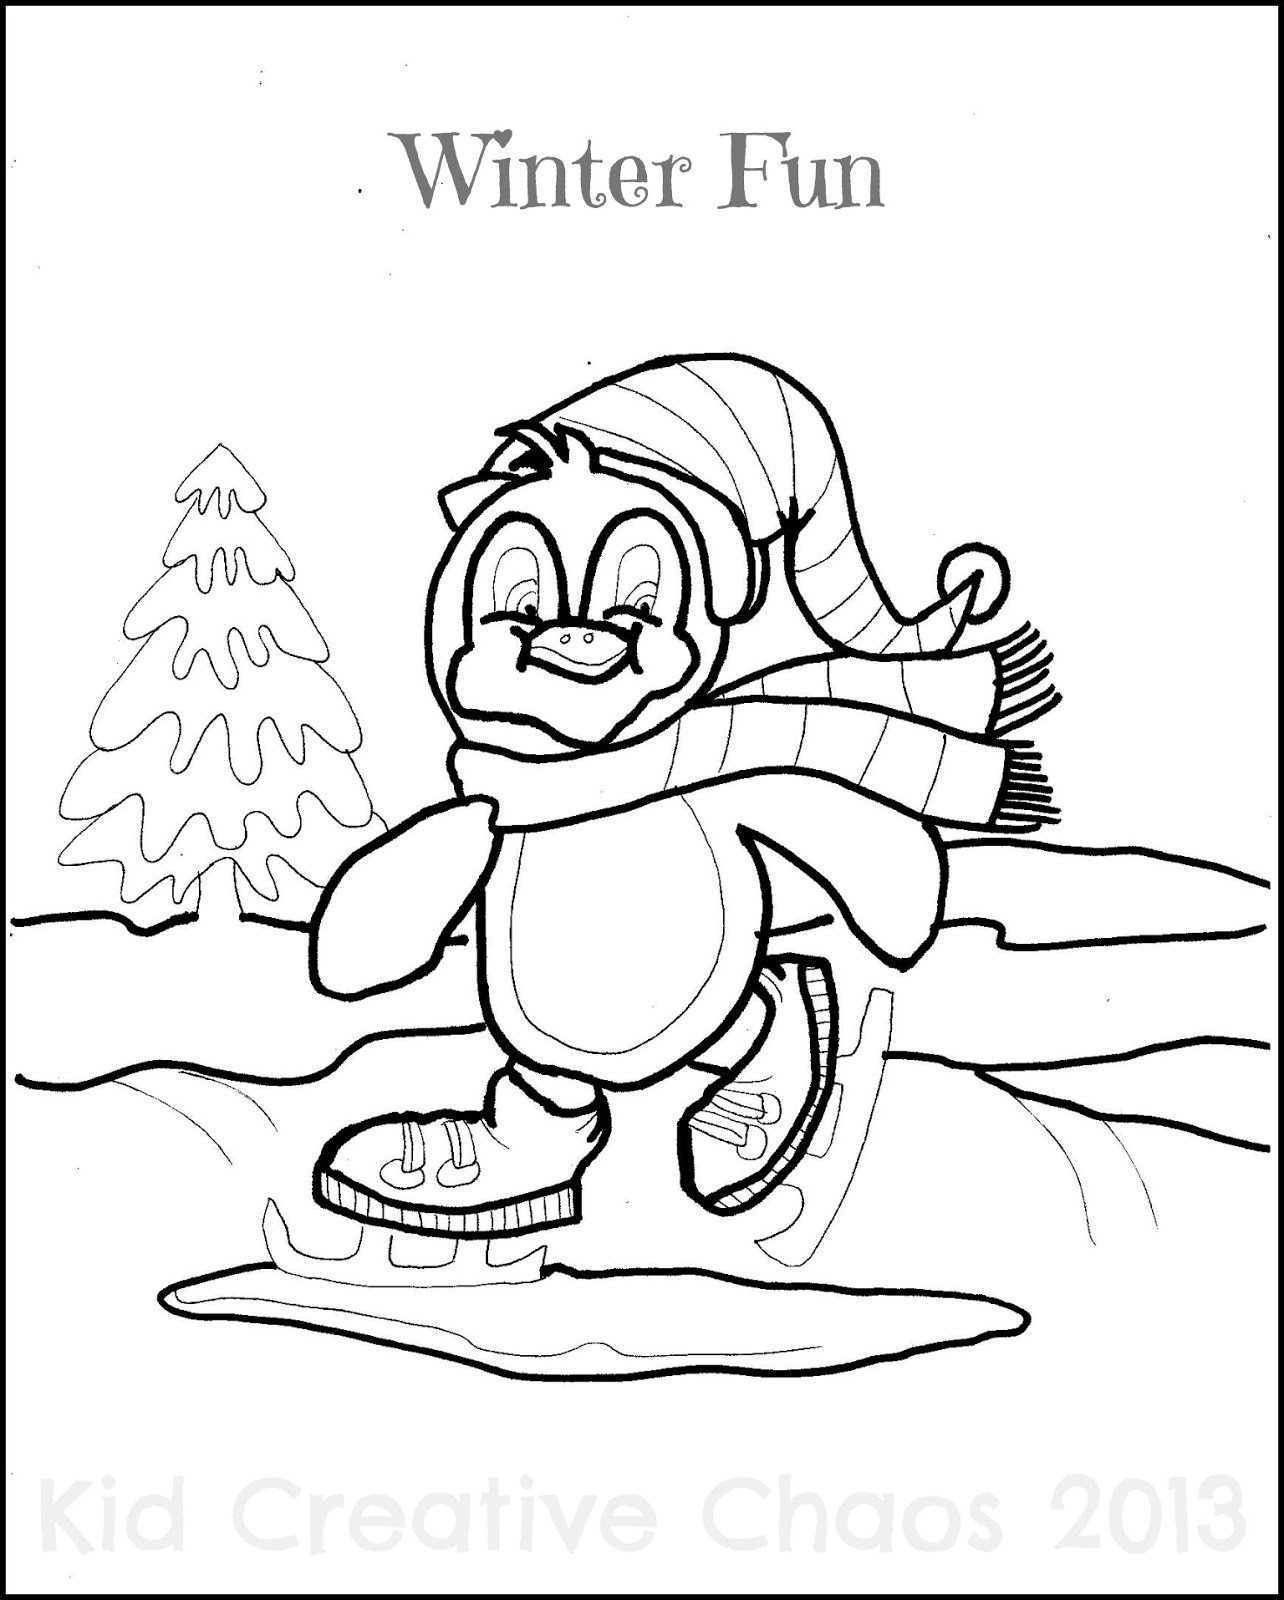 Winter Coloring Pages For Toddlers
 Penguin Printable Coloring Pages Letter P Winter Theme